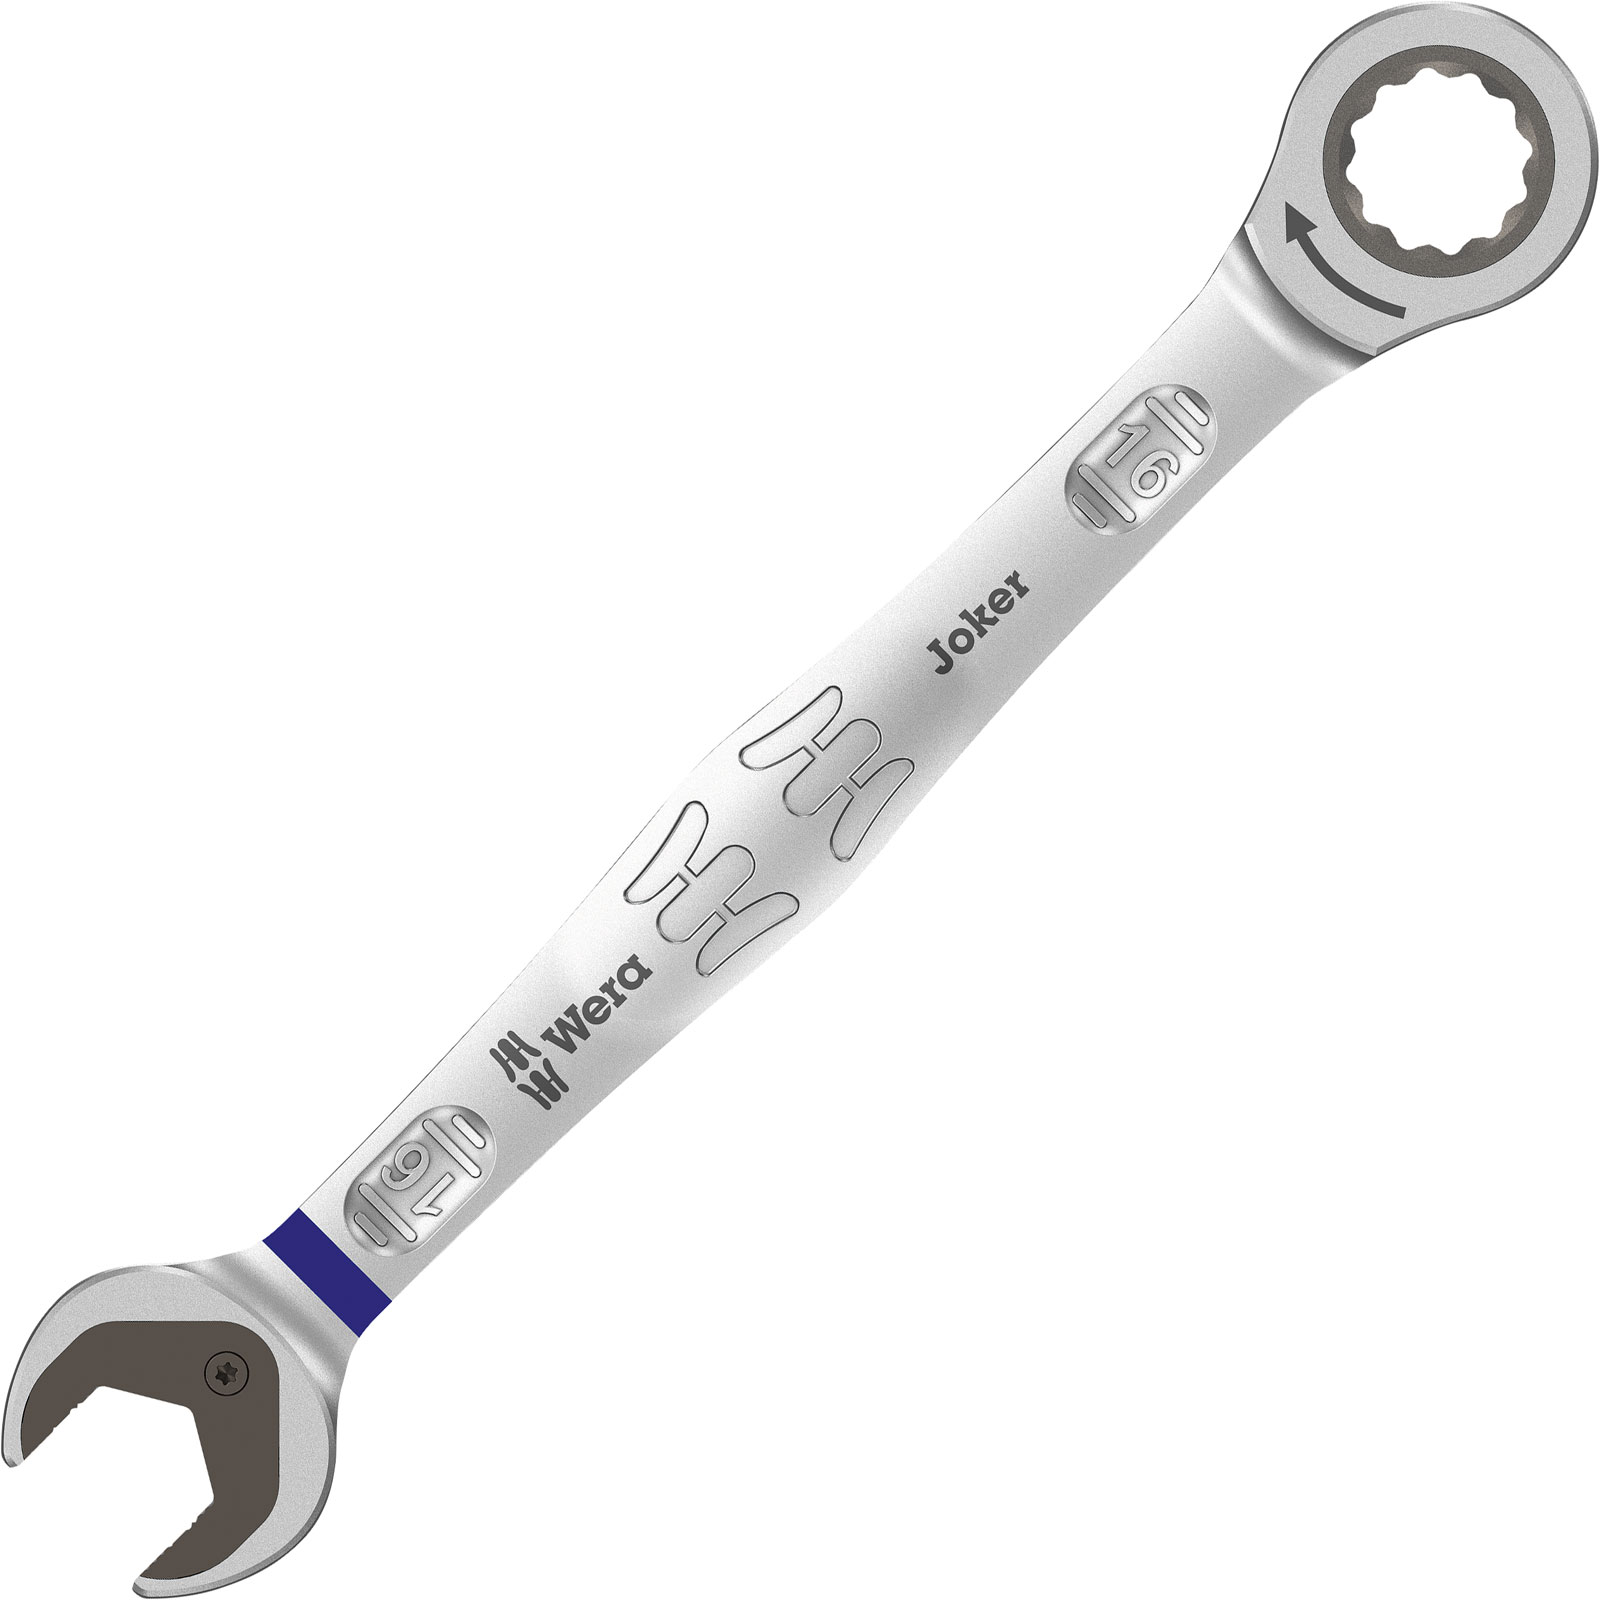 Wera JOKER Metric & Imperial Combination Ratchet Open End Ring Spanner,All  Sizes